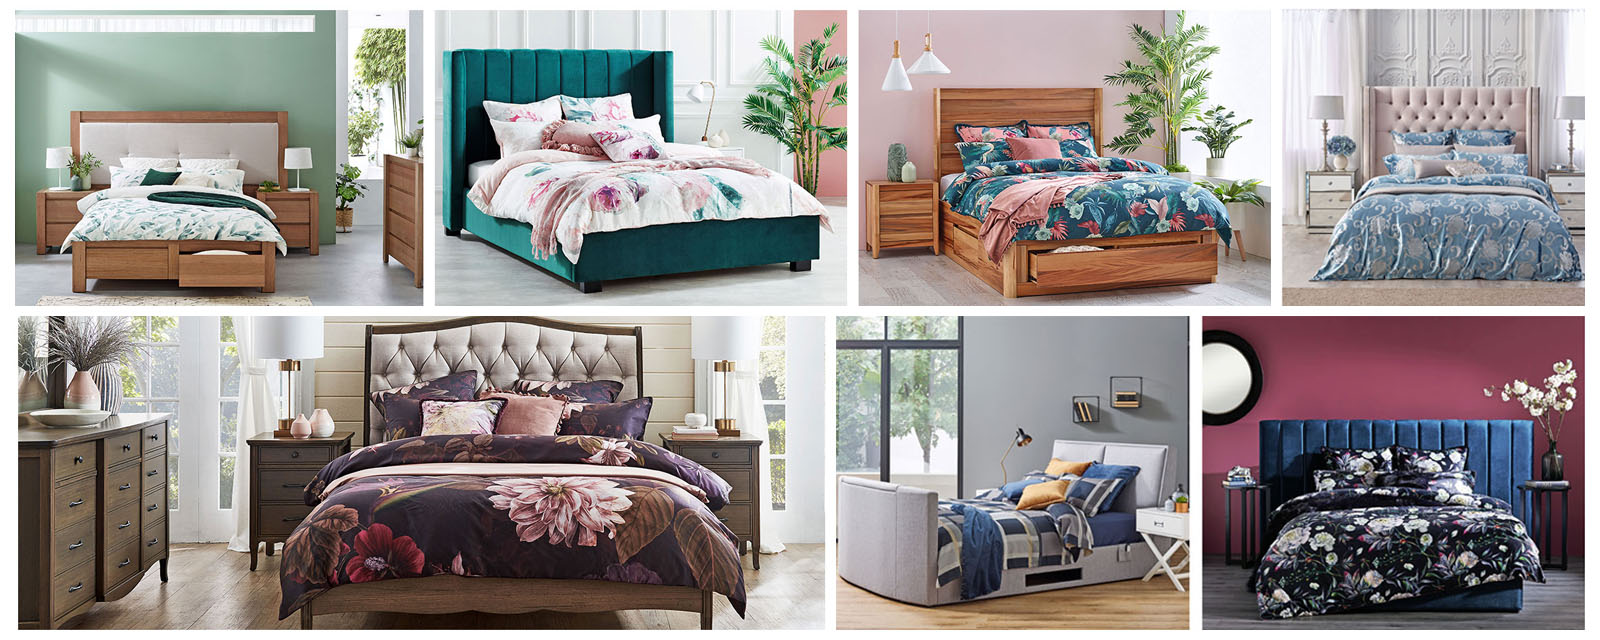 Winter Bedroom Inspiration 3 Colour Trends You Ll Love This